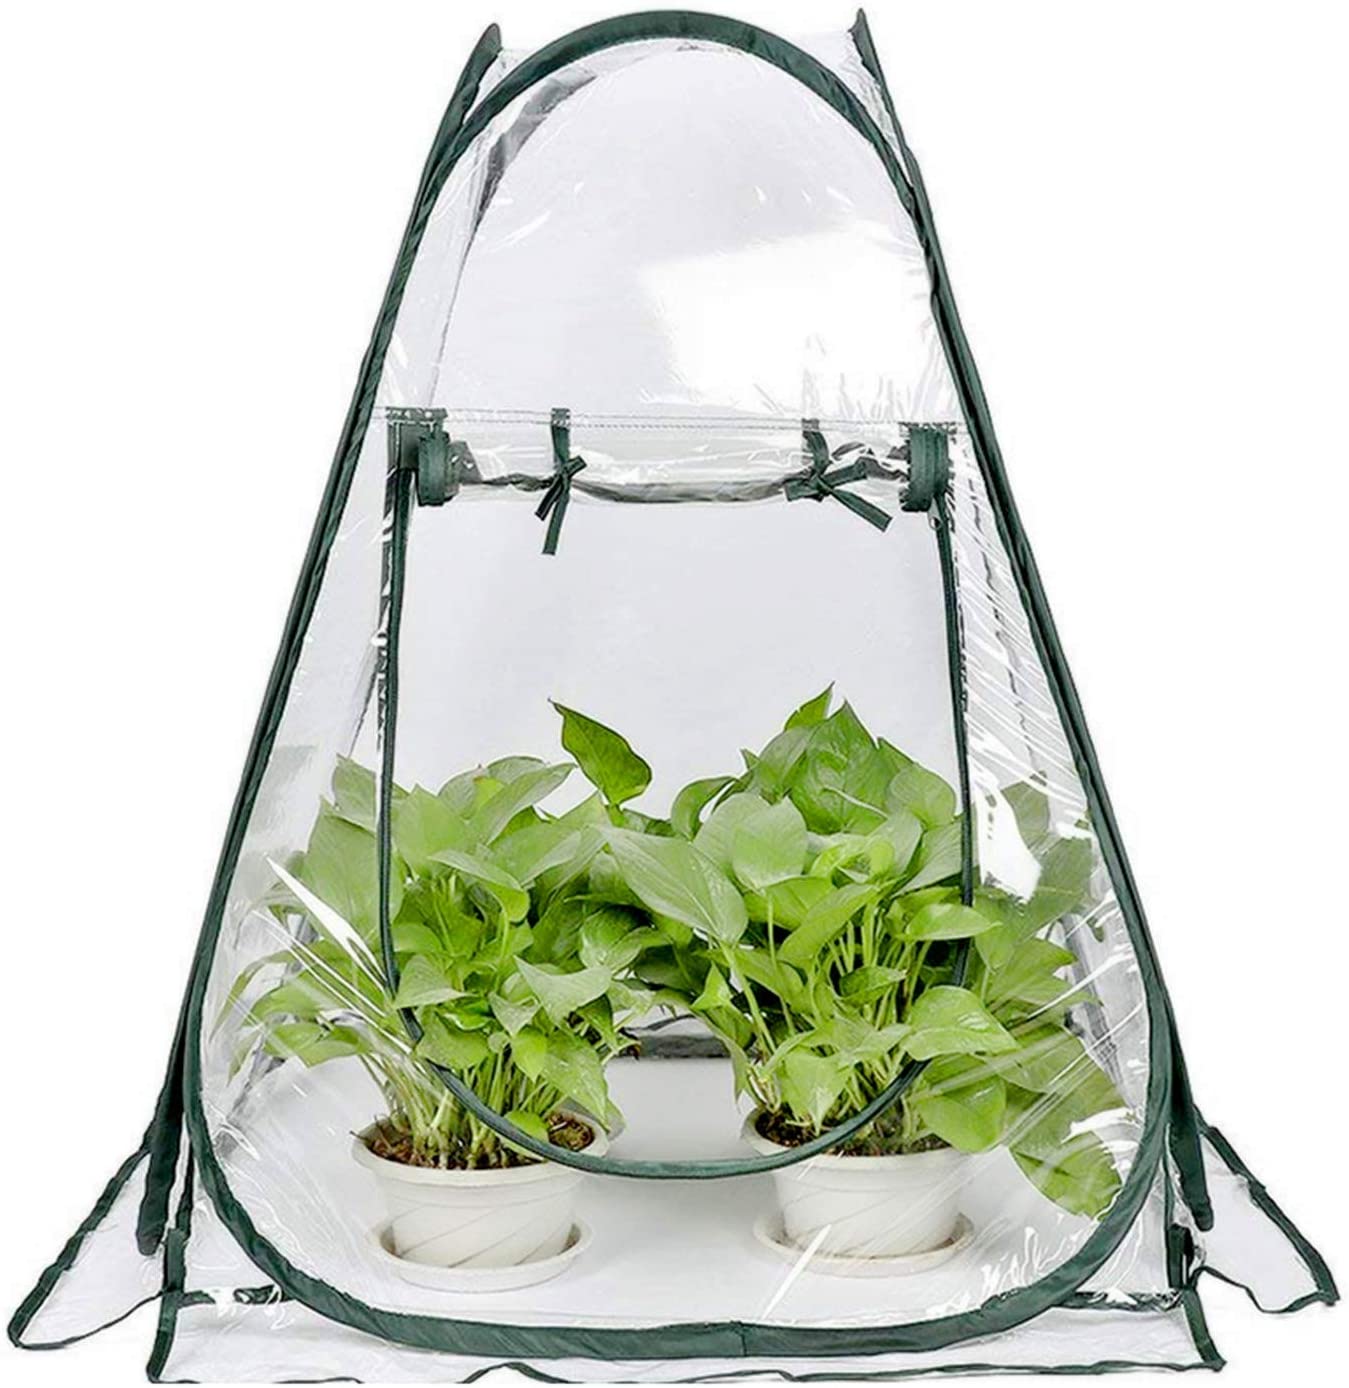 Mini small greenhouse for indoor or outdoor plants